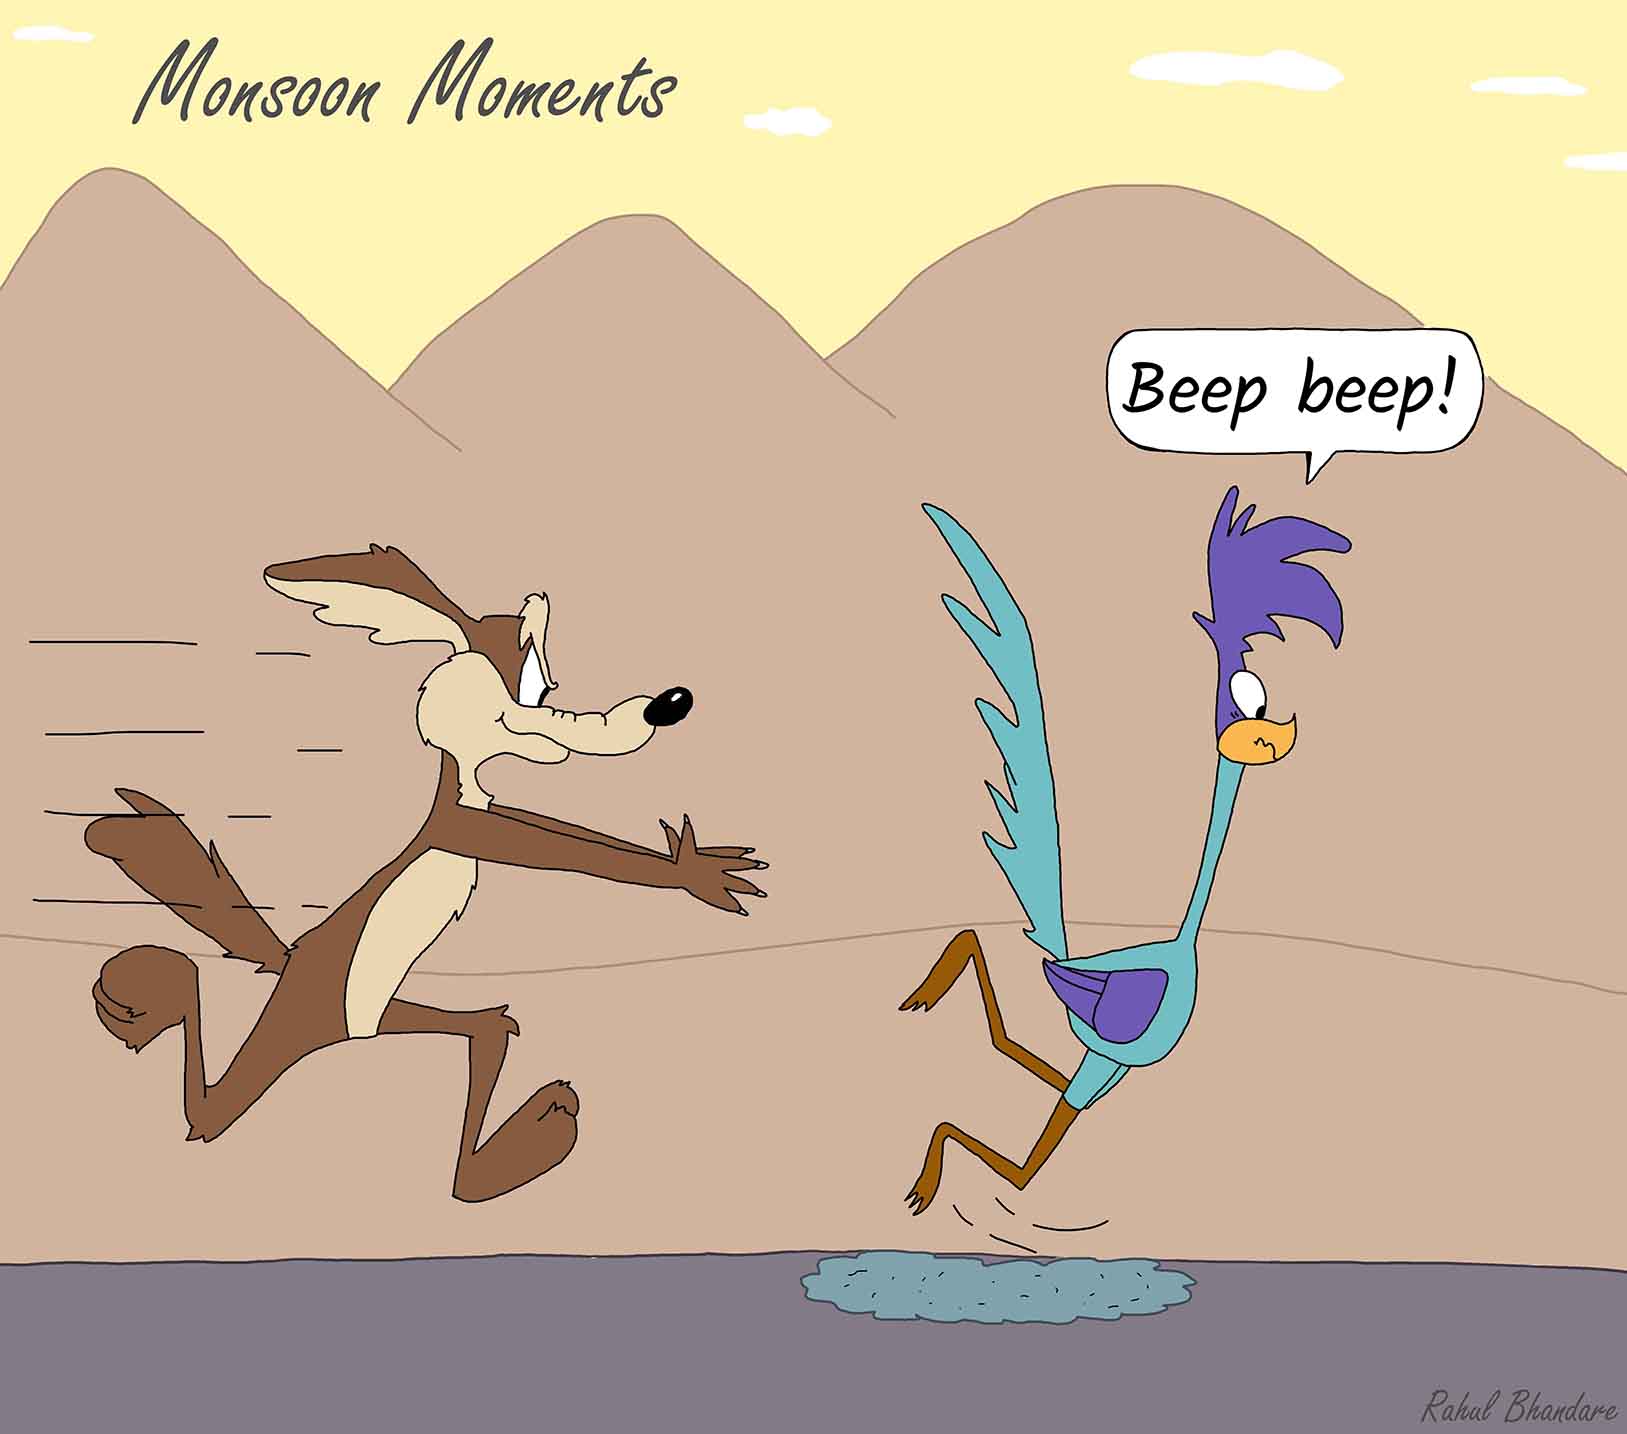 Monsoon Moments: Road Runner - The Comic Space